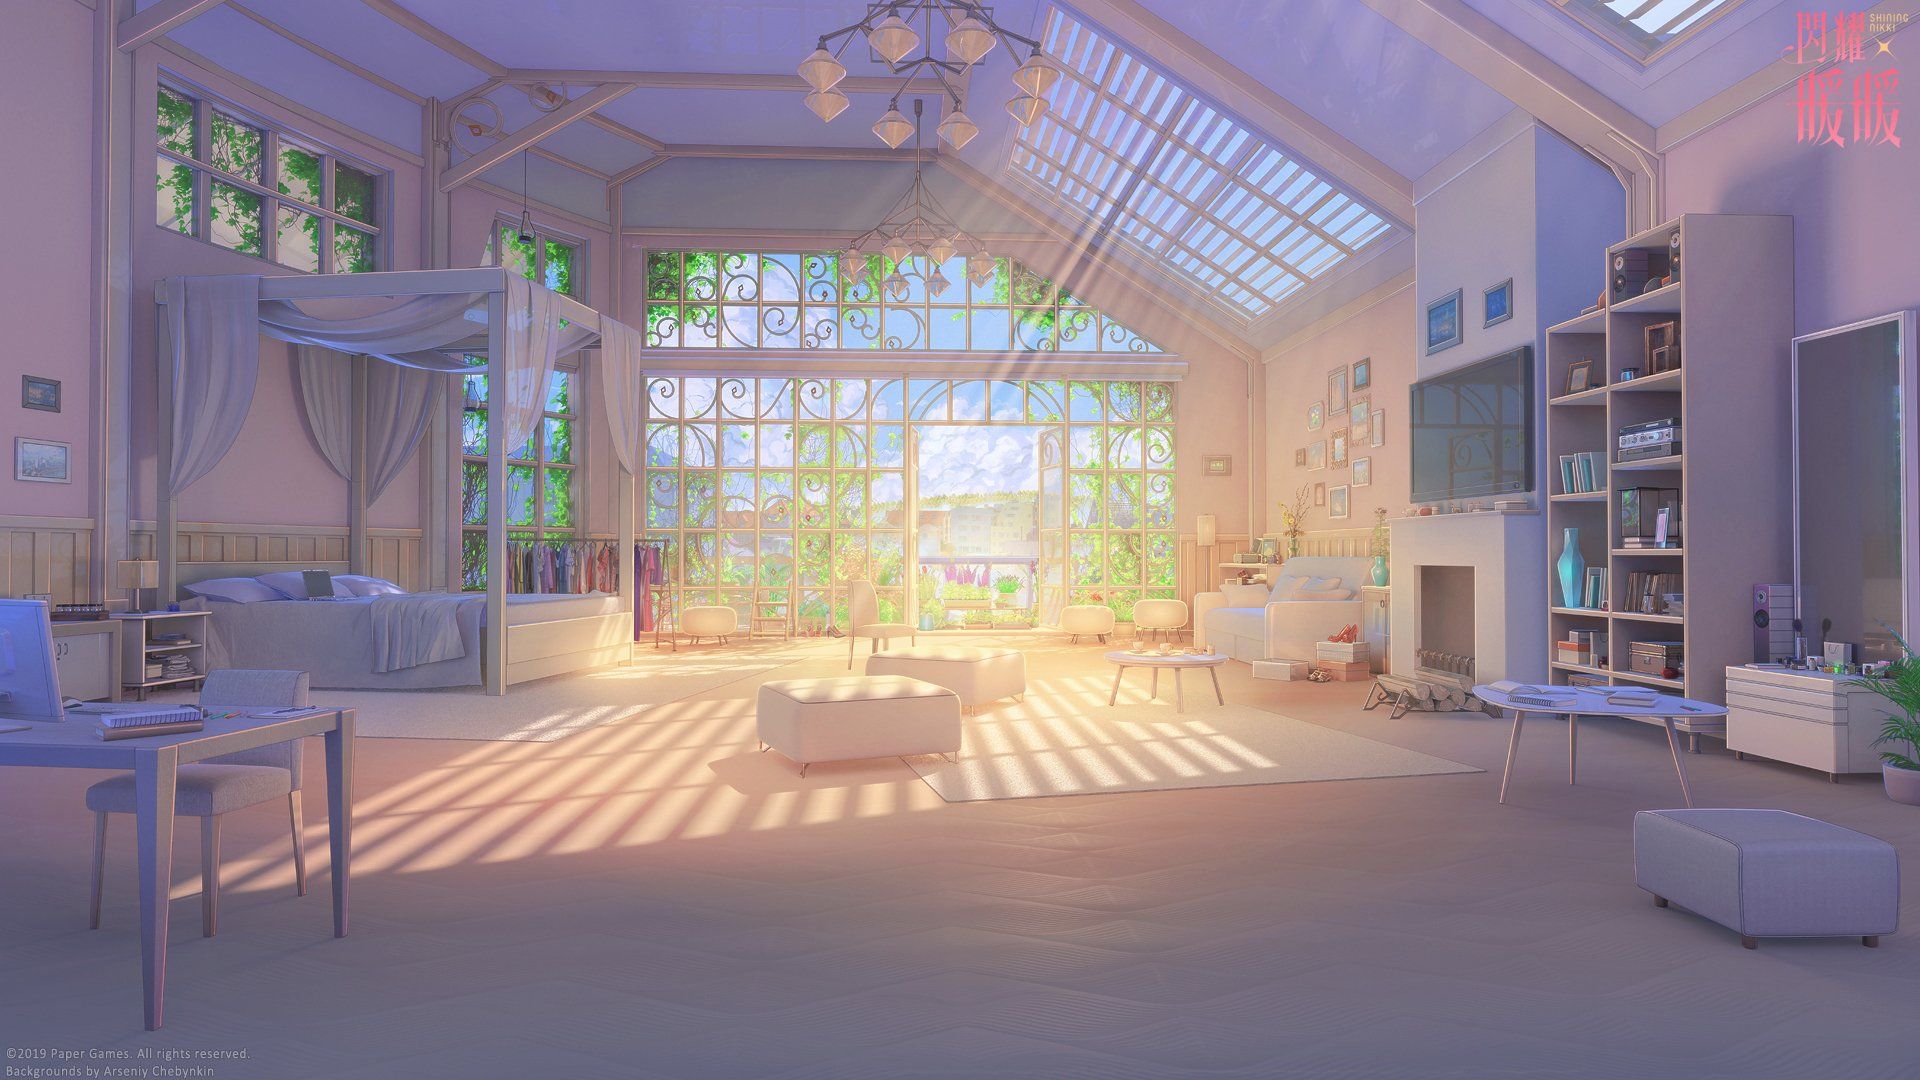 ArseniXC Room Done For “Shining Nikki” Game Developed By Paper Games More Info On Site. Illustrations May Be Little Different Modified For The Sake Of Unified Hues